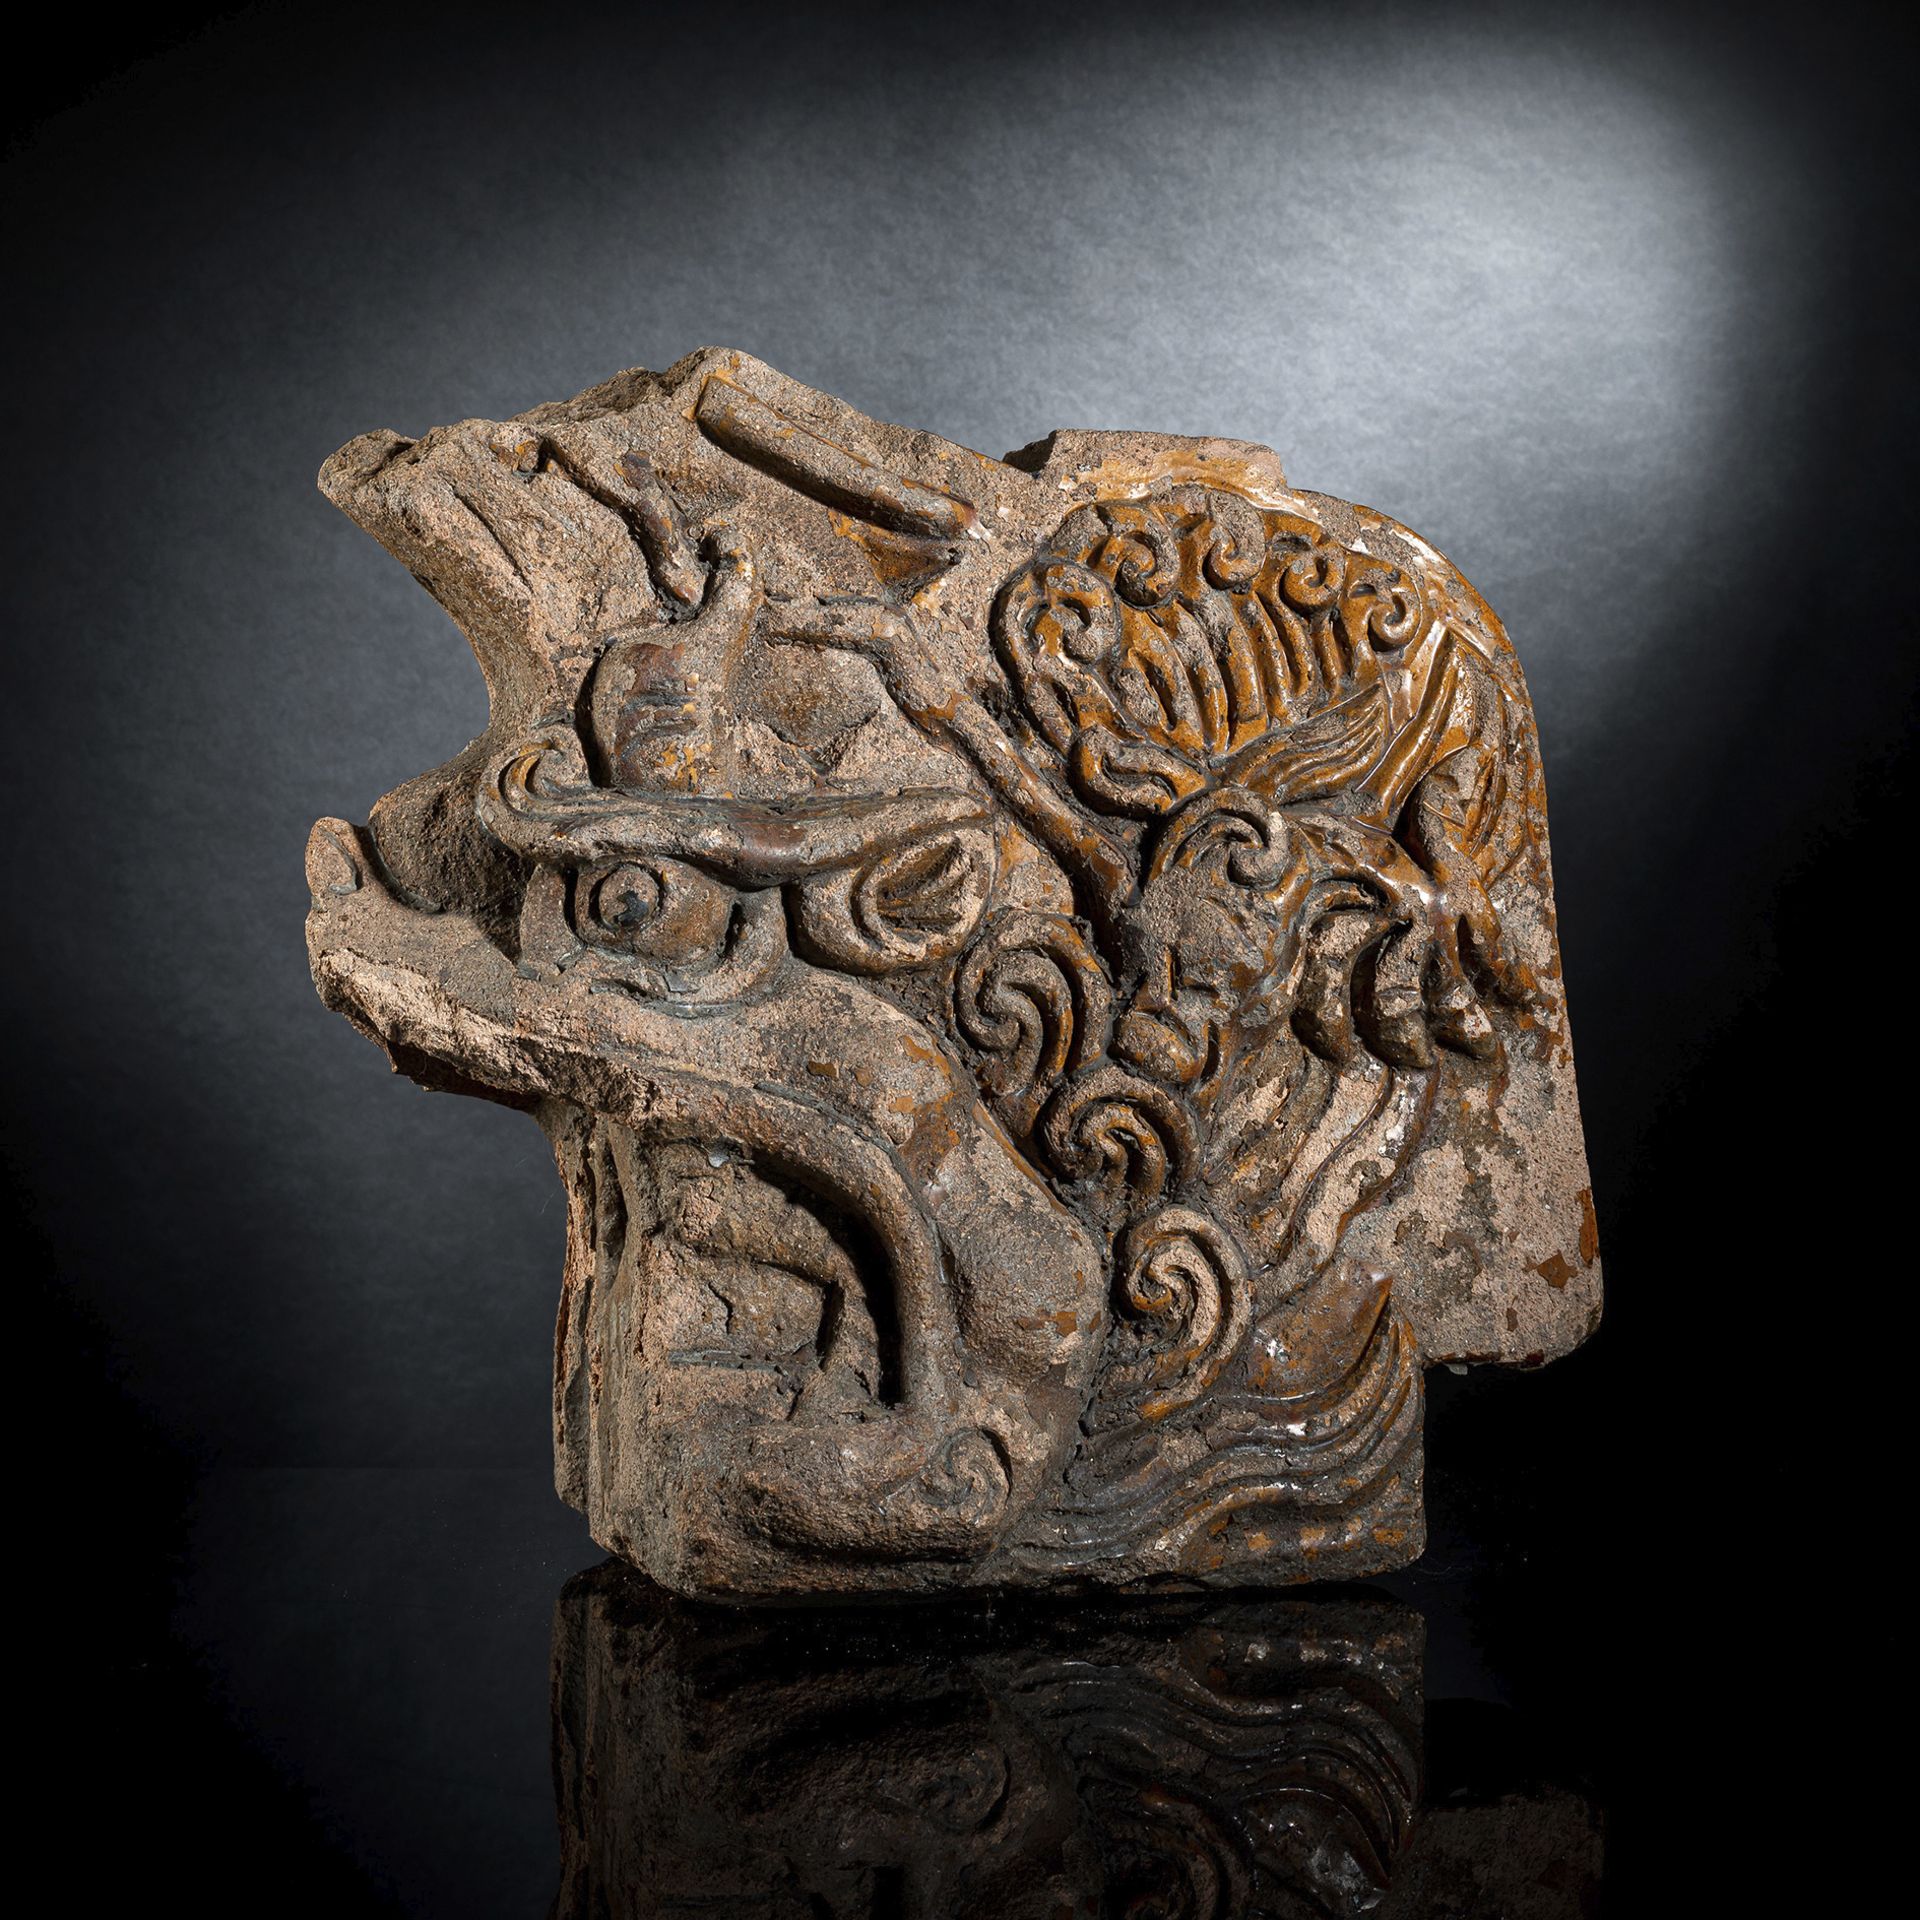 A LARGE GLAZED POTTERY DRAGON ROOF-TILE OR ARCHITECTURAL ELEMENT - Image 2 of 2